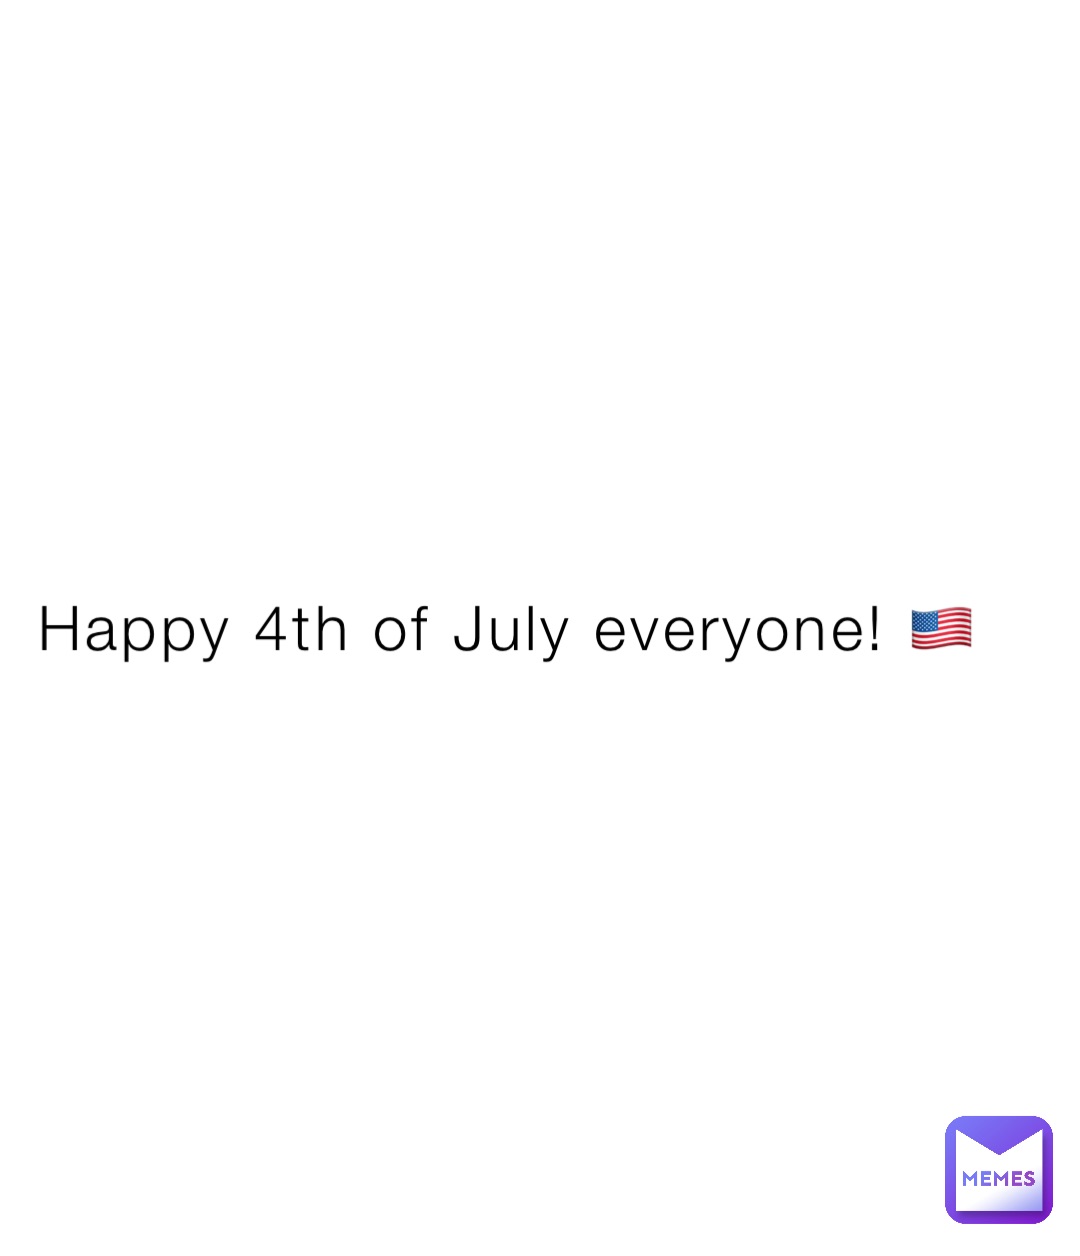 Happy 4th of July everyone! 🇺🇸